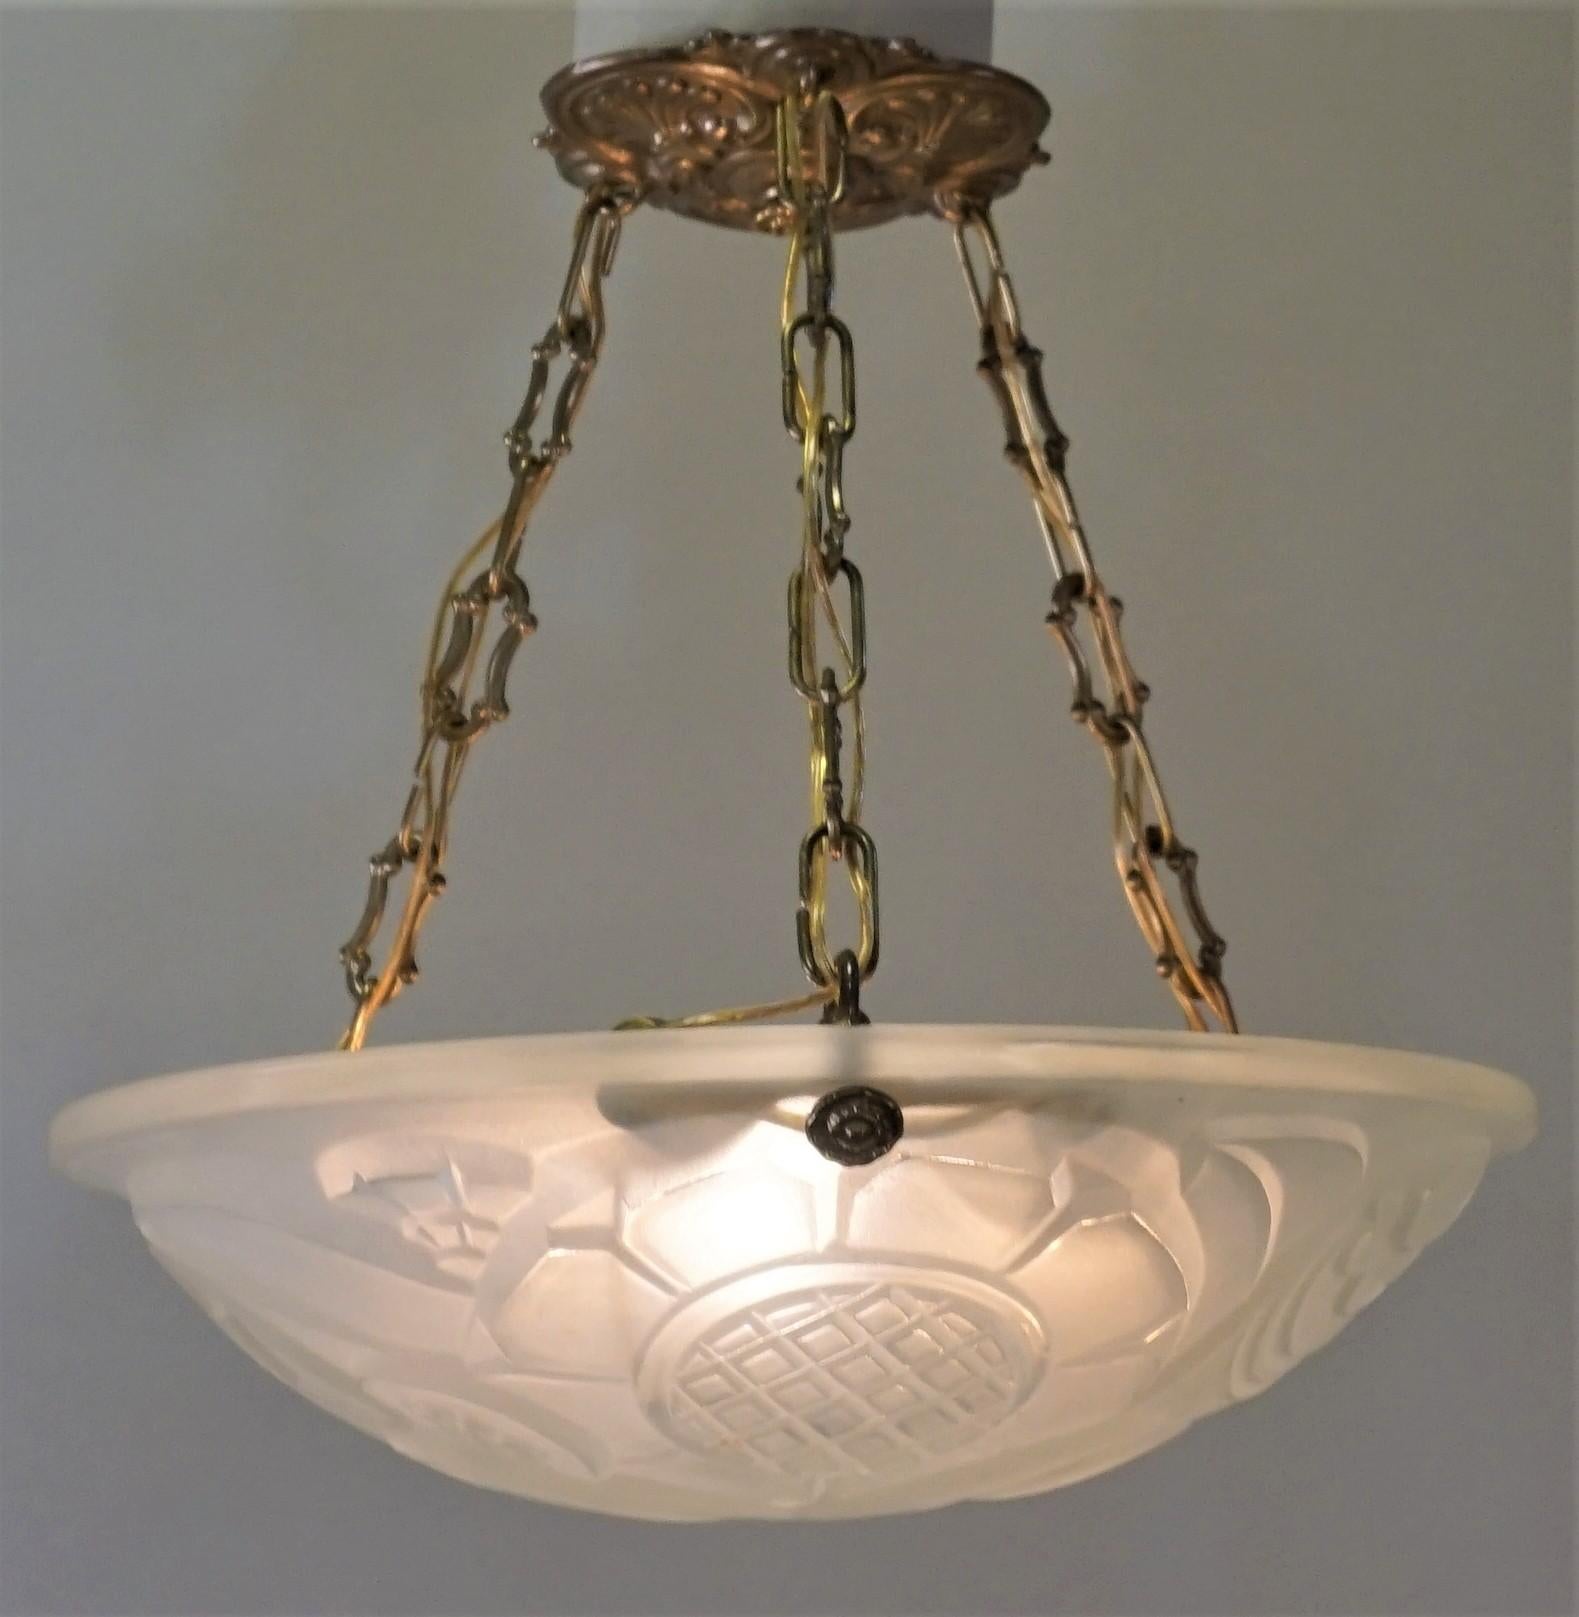 Clear frost glass with bronze hardware Art Deco chandelier.
Total of six lights 60 watts each
Measures: 13.5